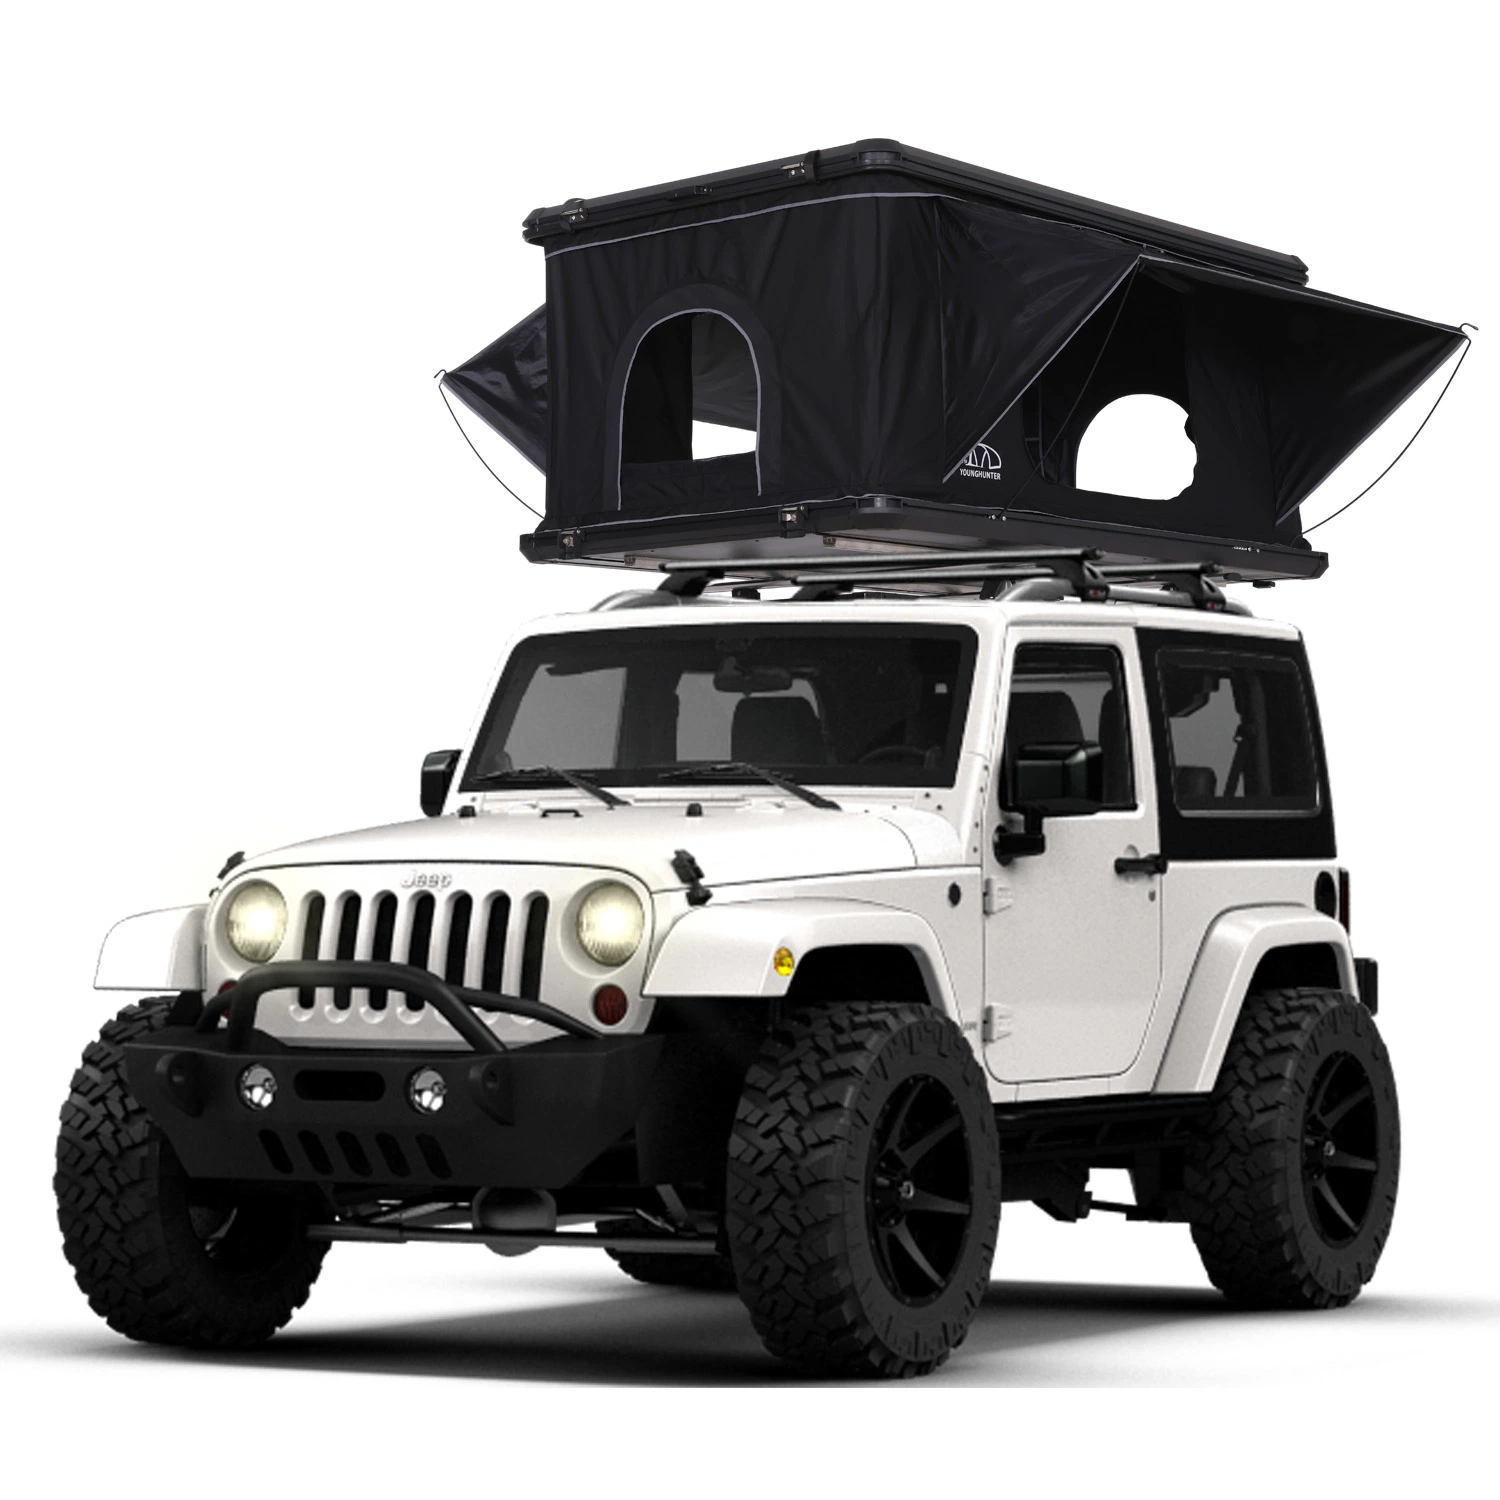 210*130*110cm Camping Automatic Pop up SUV Lightweight Hard Shell Alu Cab Roof Top Tent